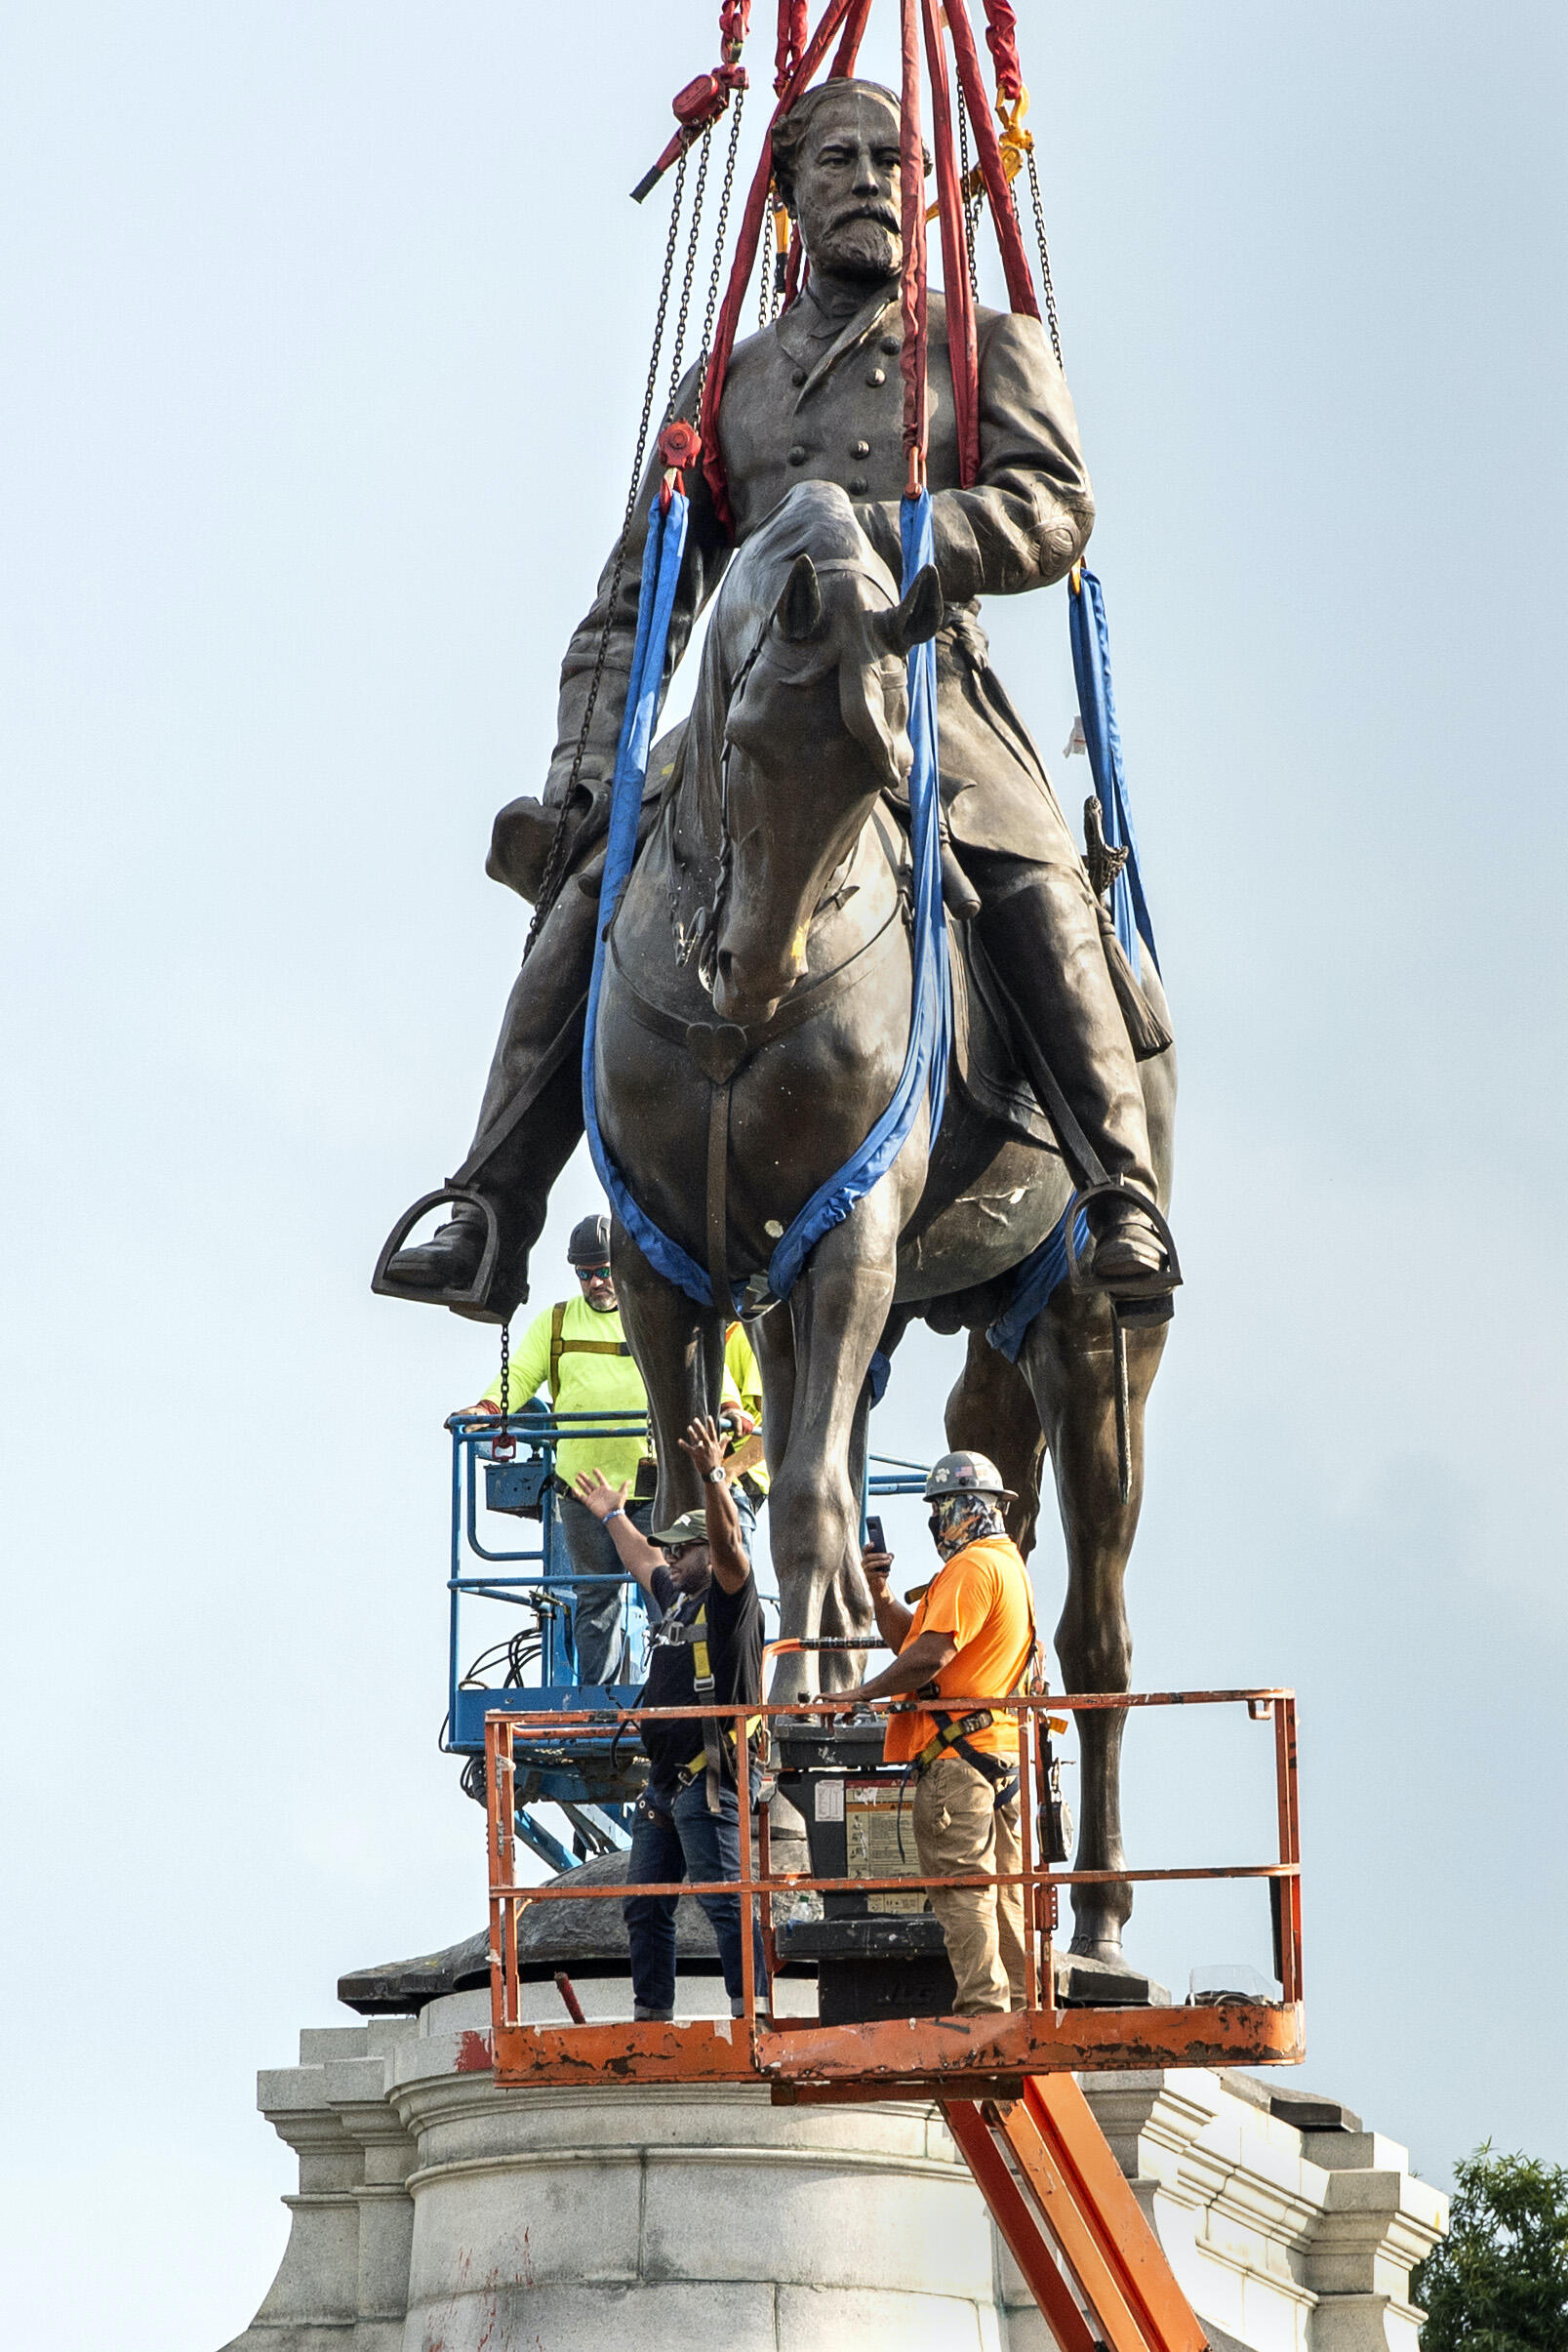 Workers prepare to remove the Robert E. Lee statue from its plinth